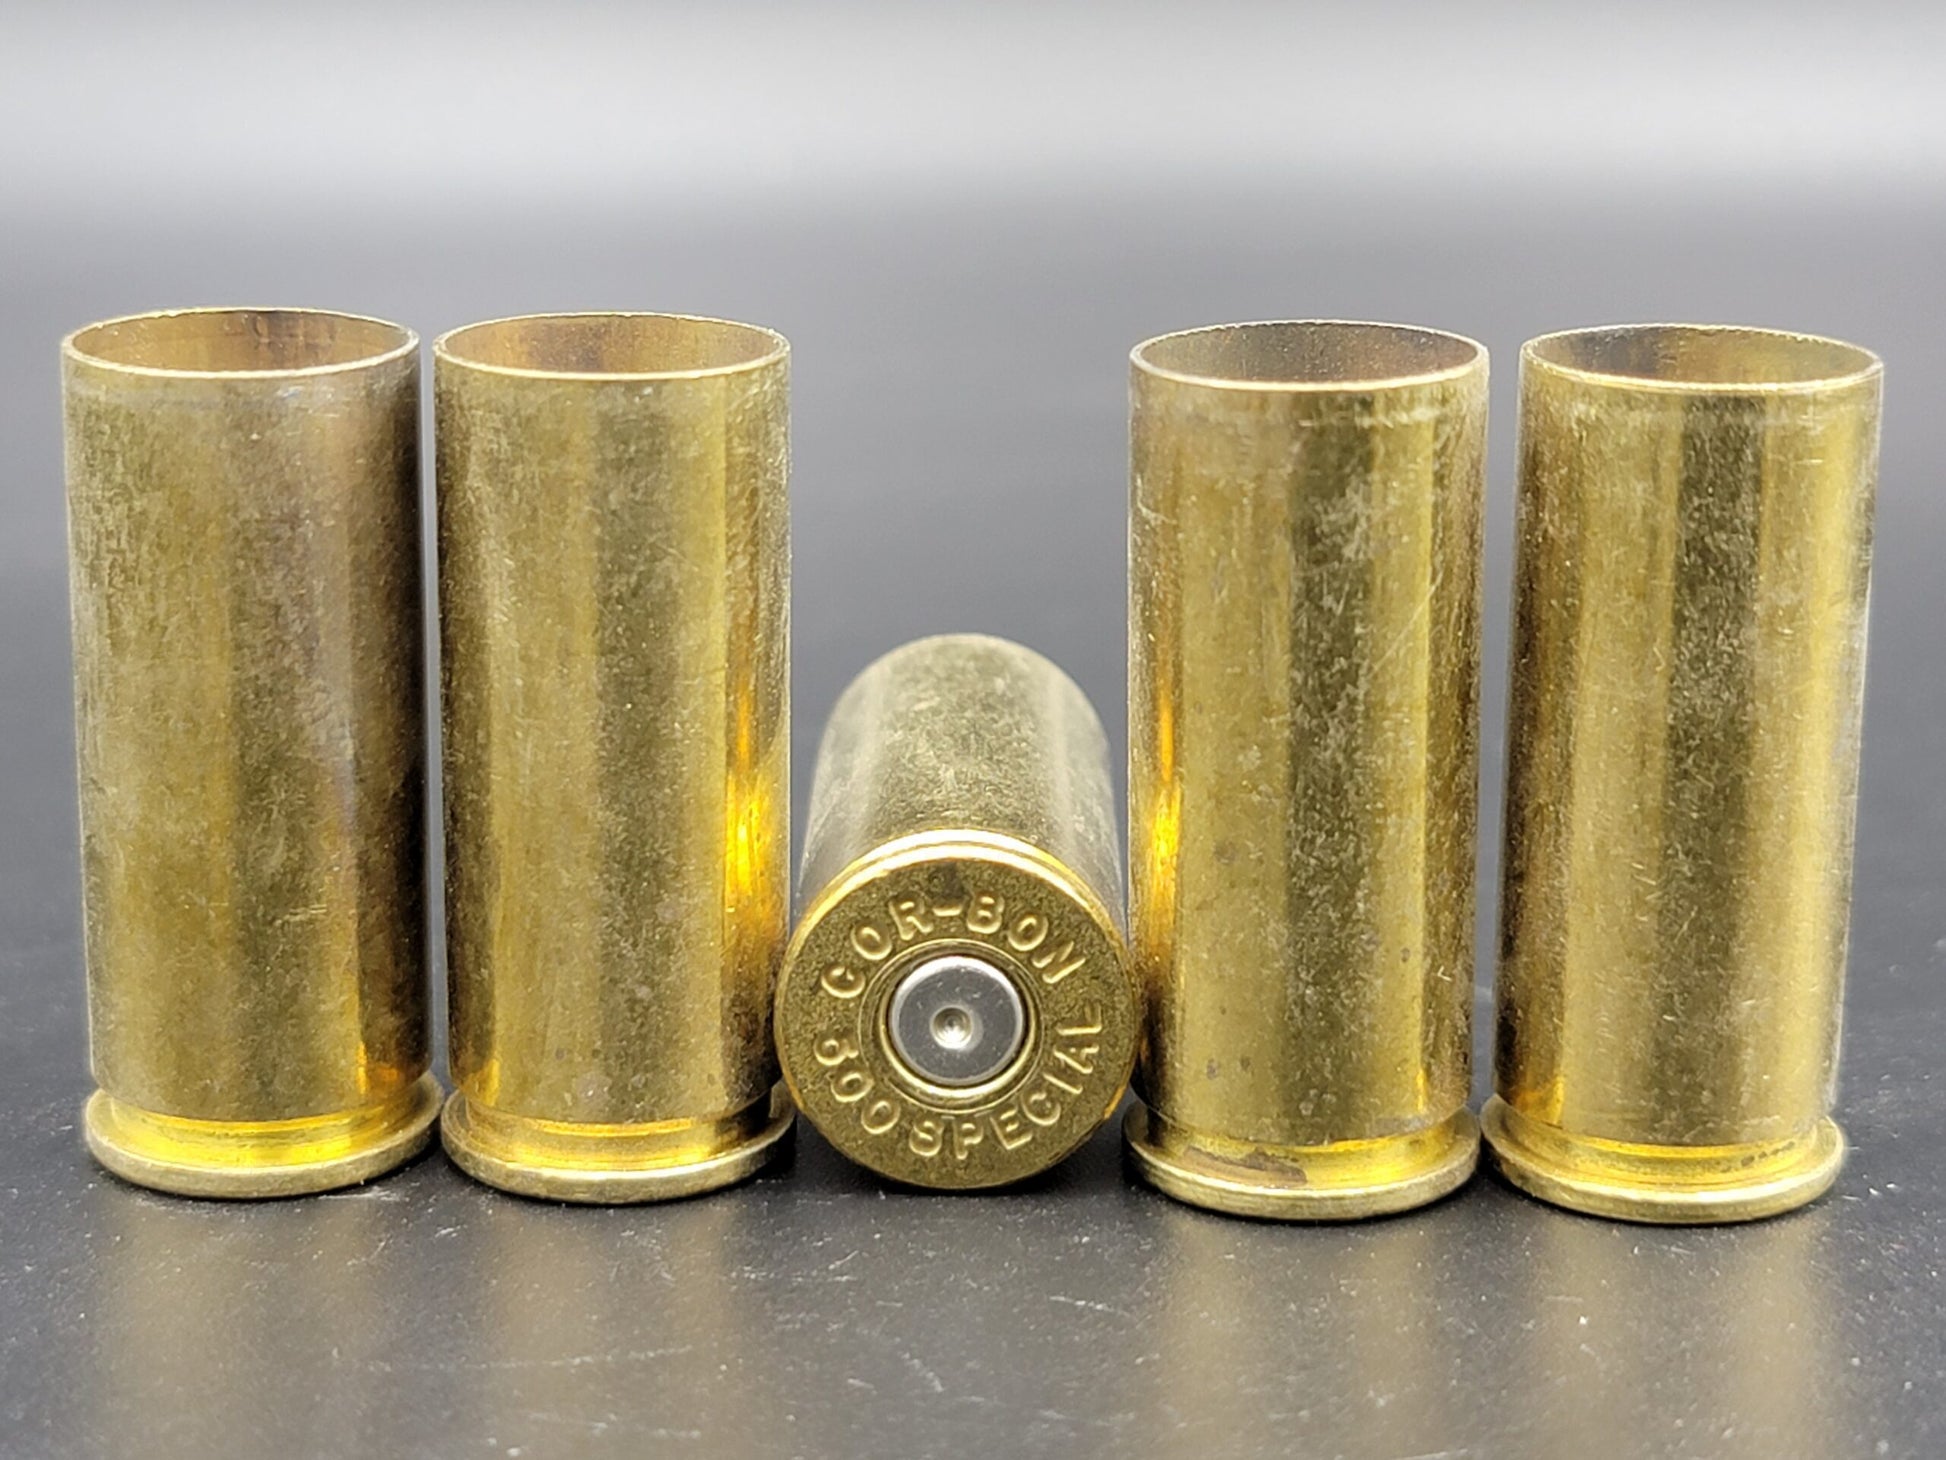 500 Special once fired pistol brass. Hand sorted from reputable indoor/military ranges for reloading. Reliable spent casings for precision shooting.